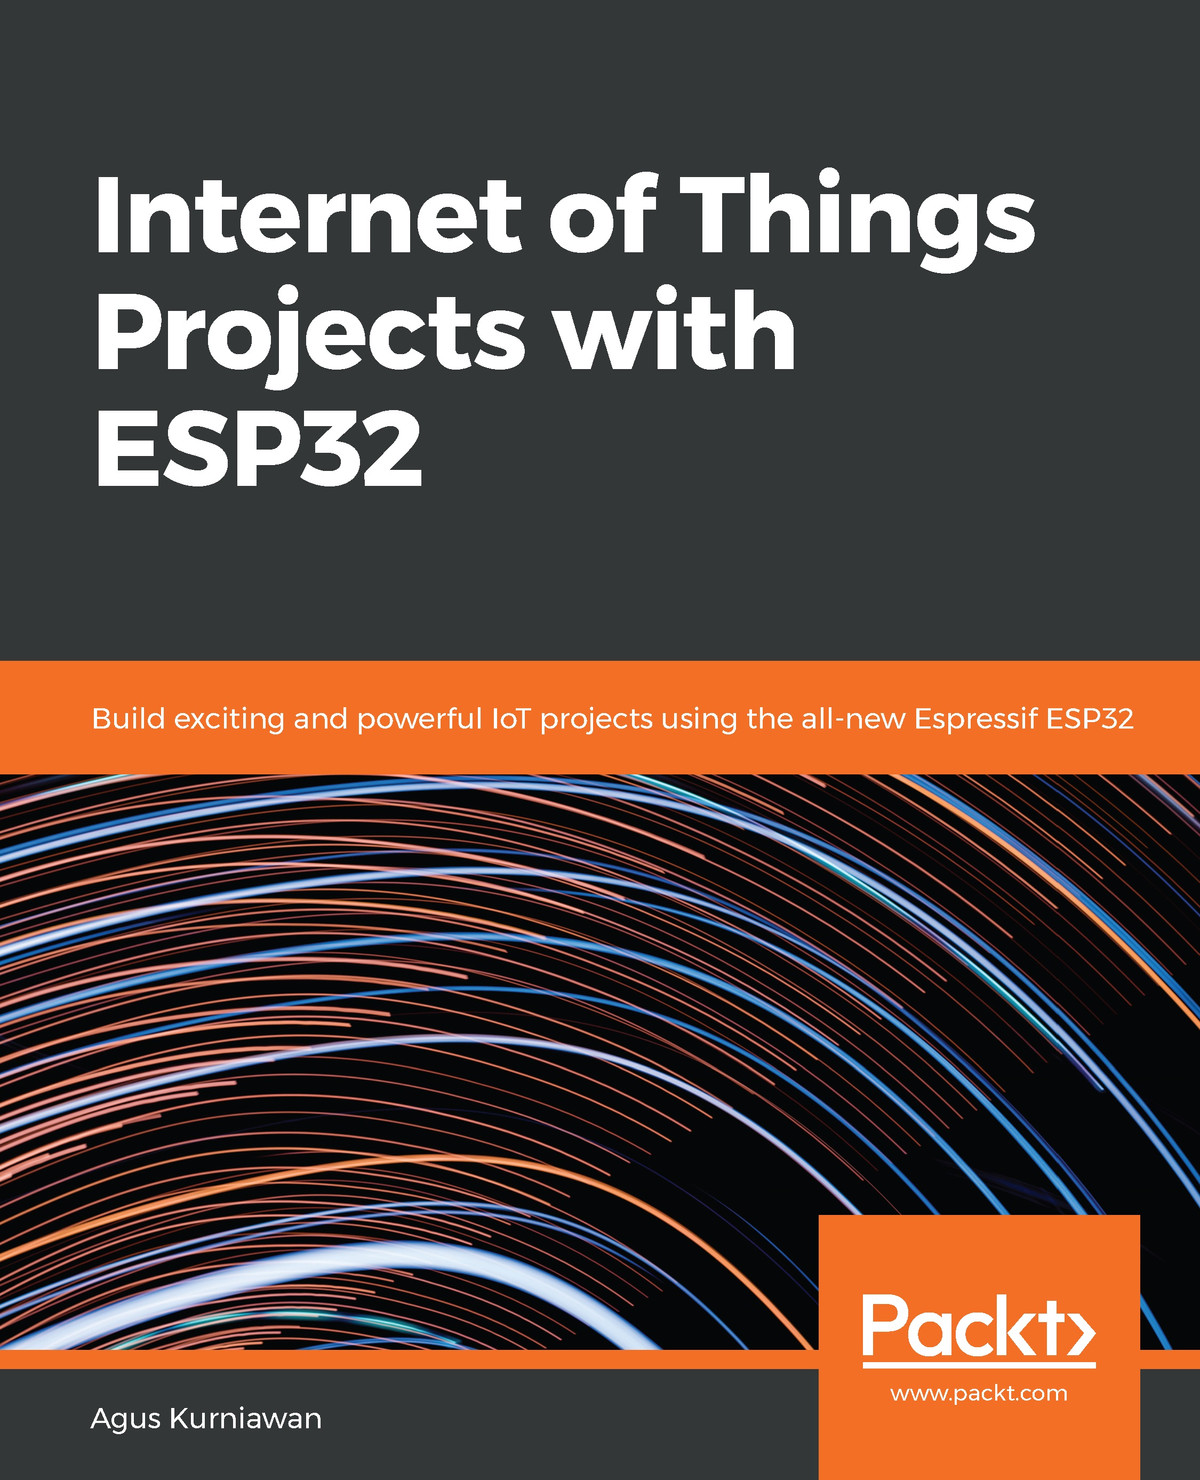 Agus Kurniawan: Internet of Things Projects with ESP32 (2019, Packt Publishing, Limited)